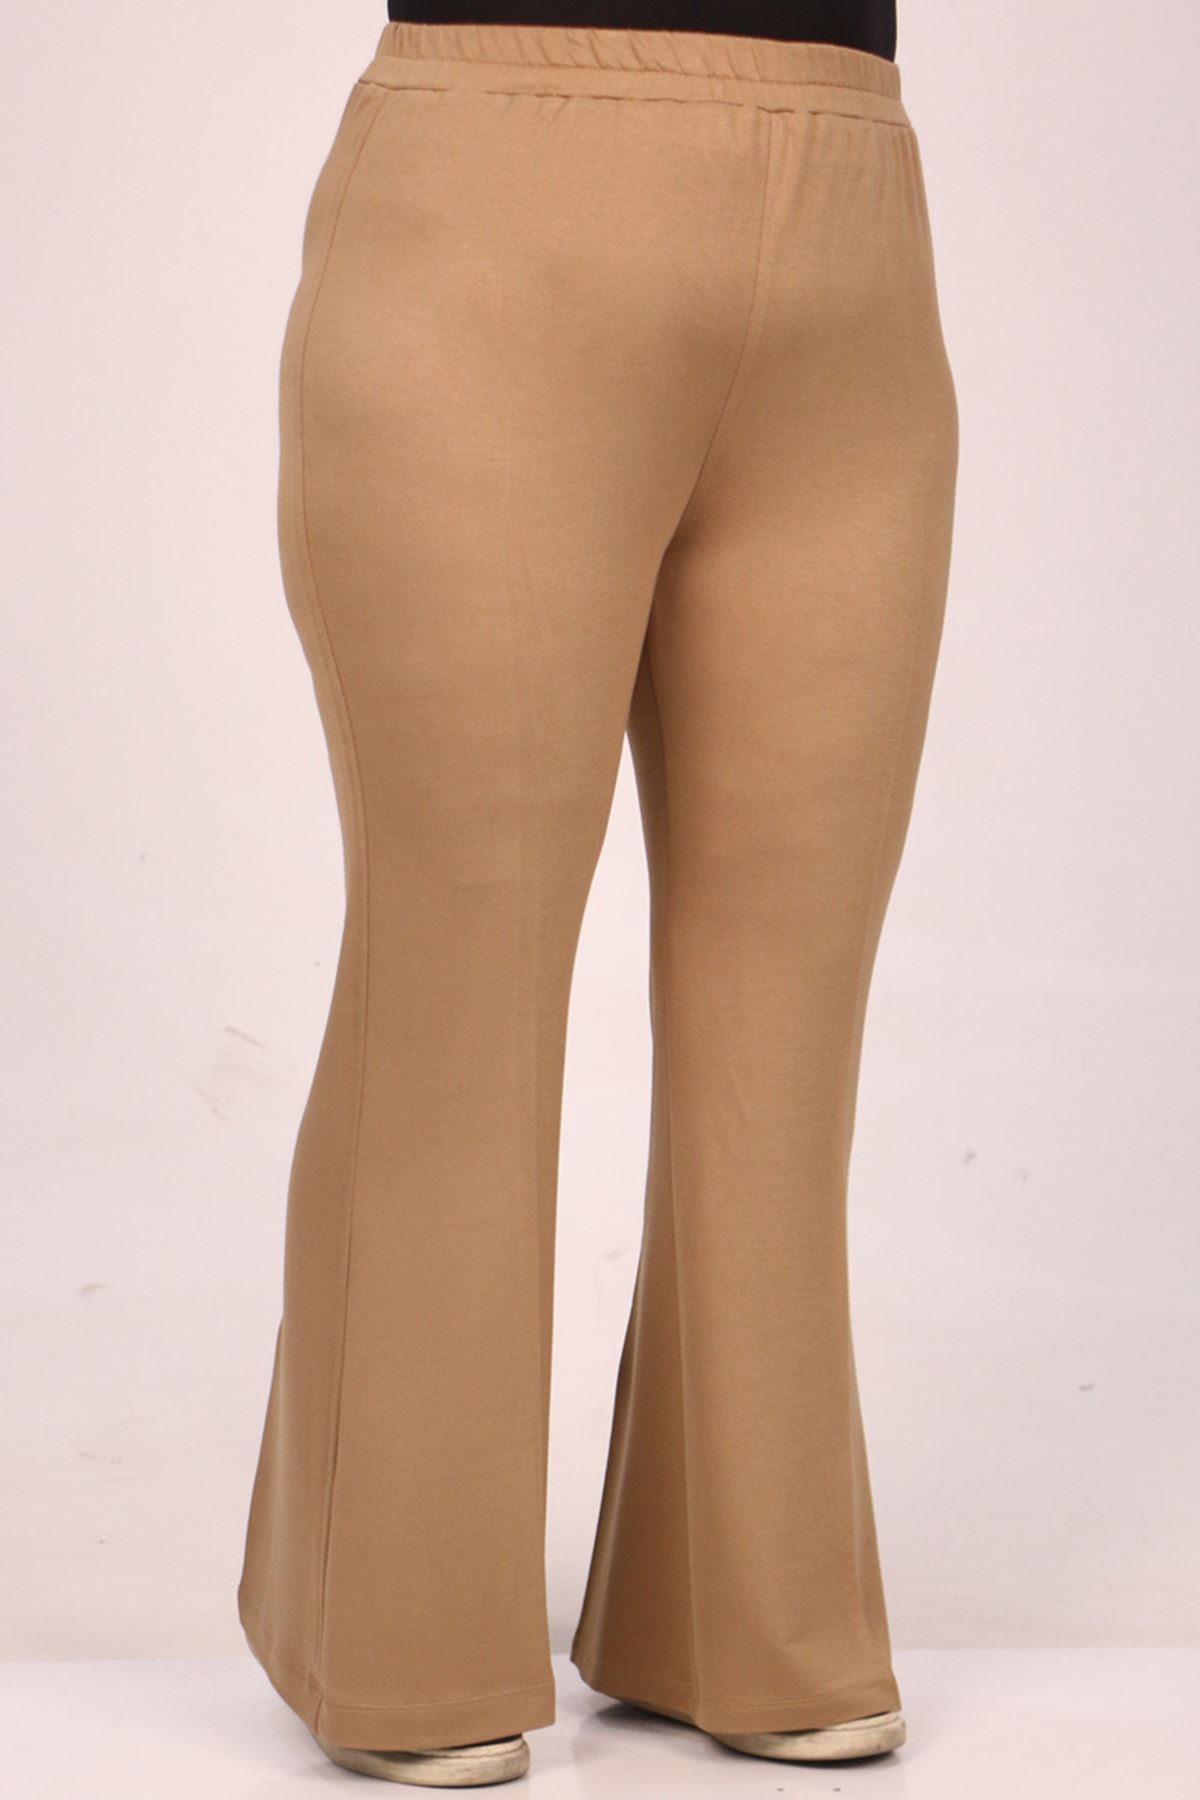 39506 Plus Size Flare Leg Two Threads Crystal-Mink